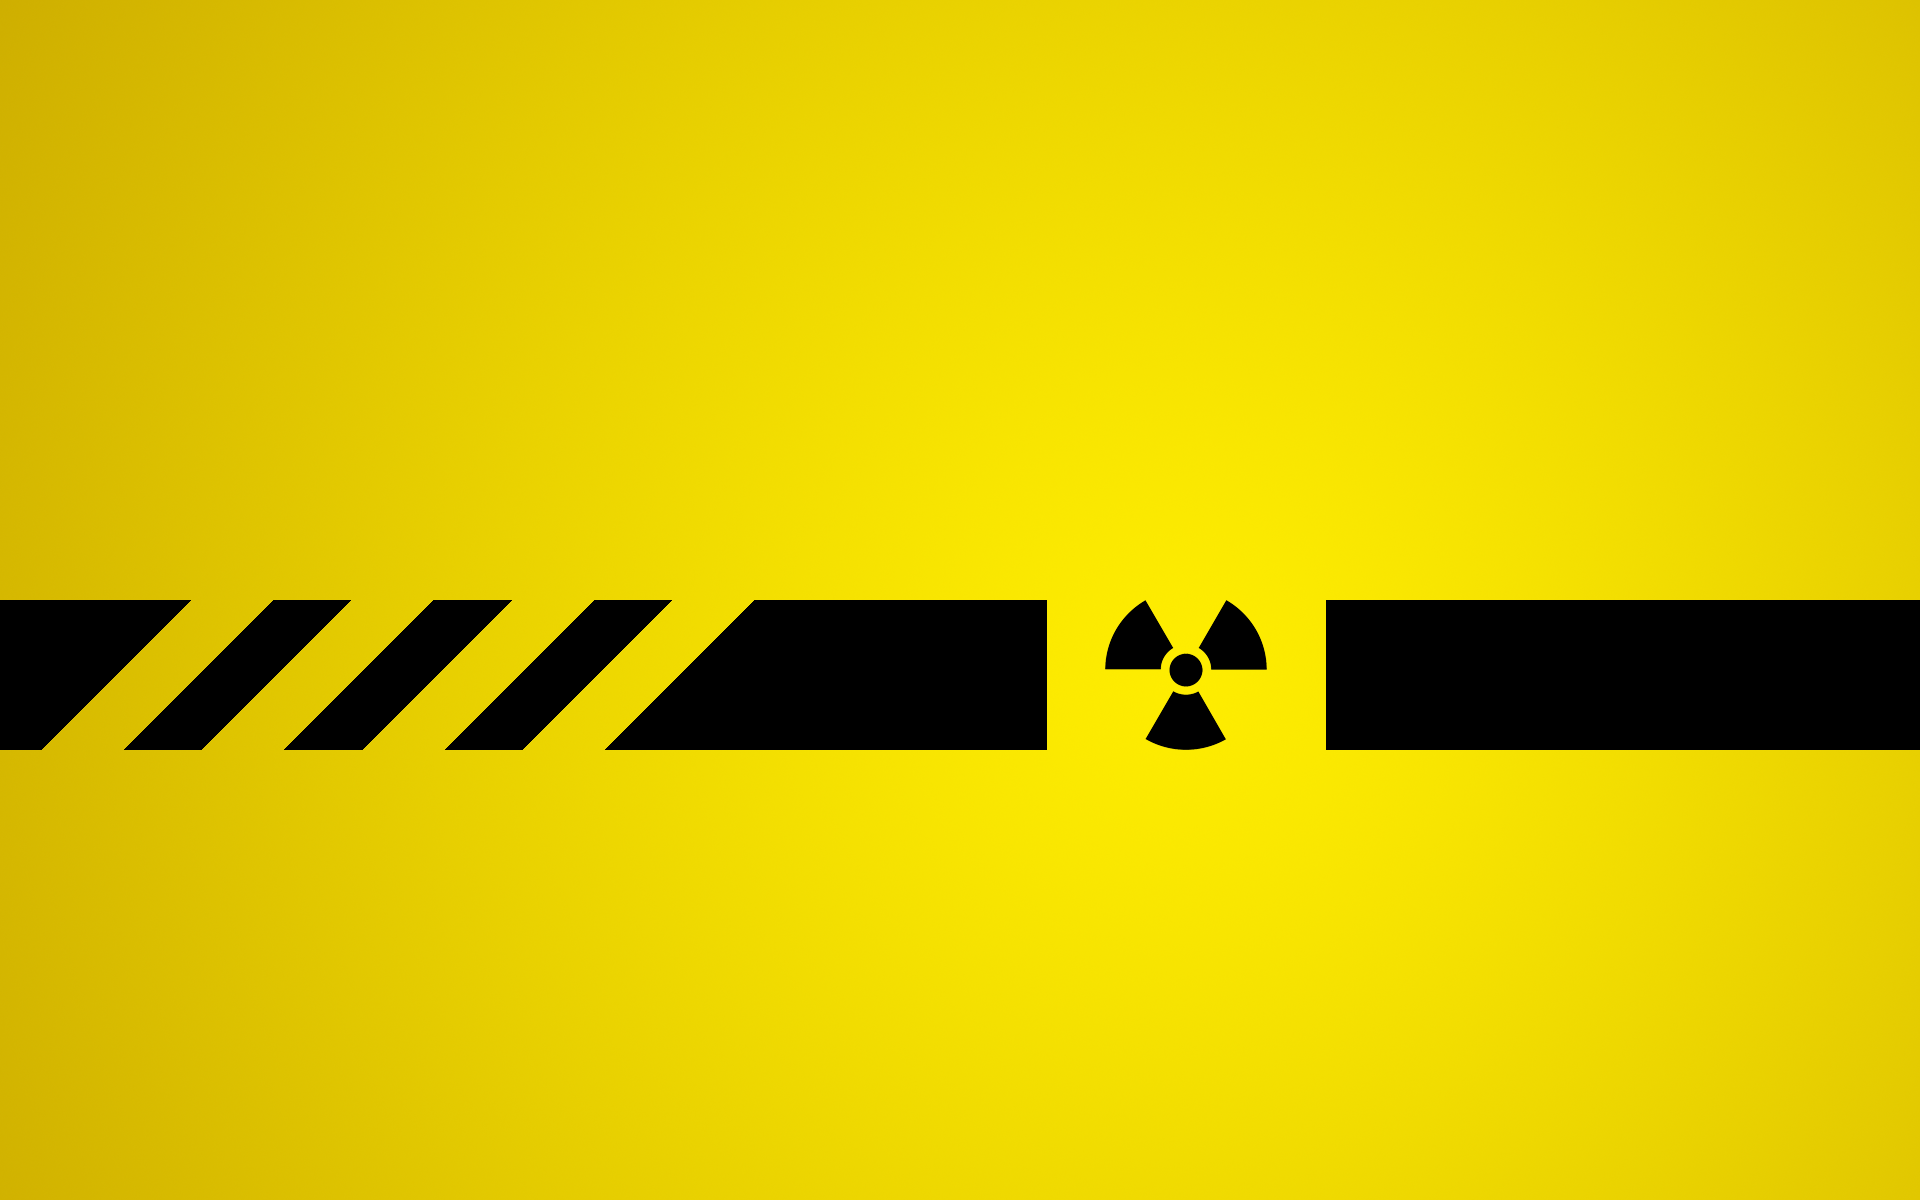 19 Radioactive HD Wallpapers | Backgrounds - Wallpaper Abyss